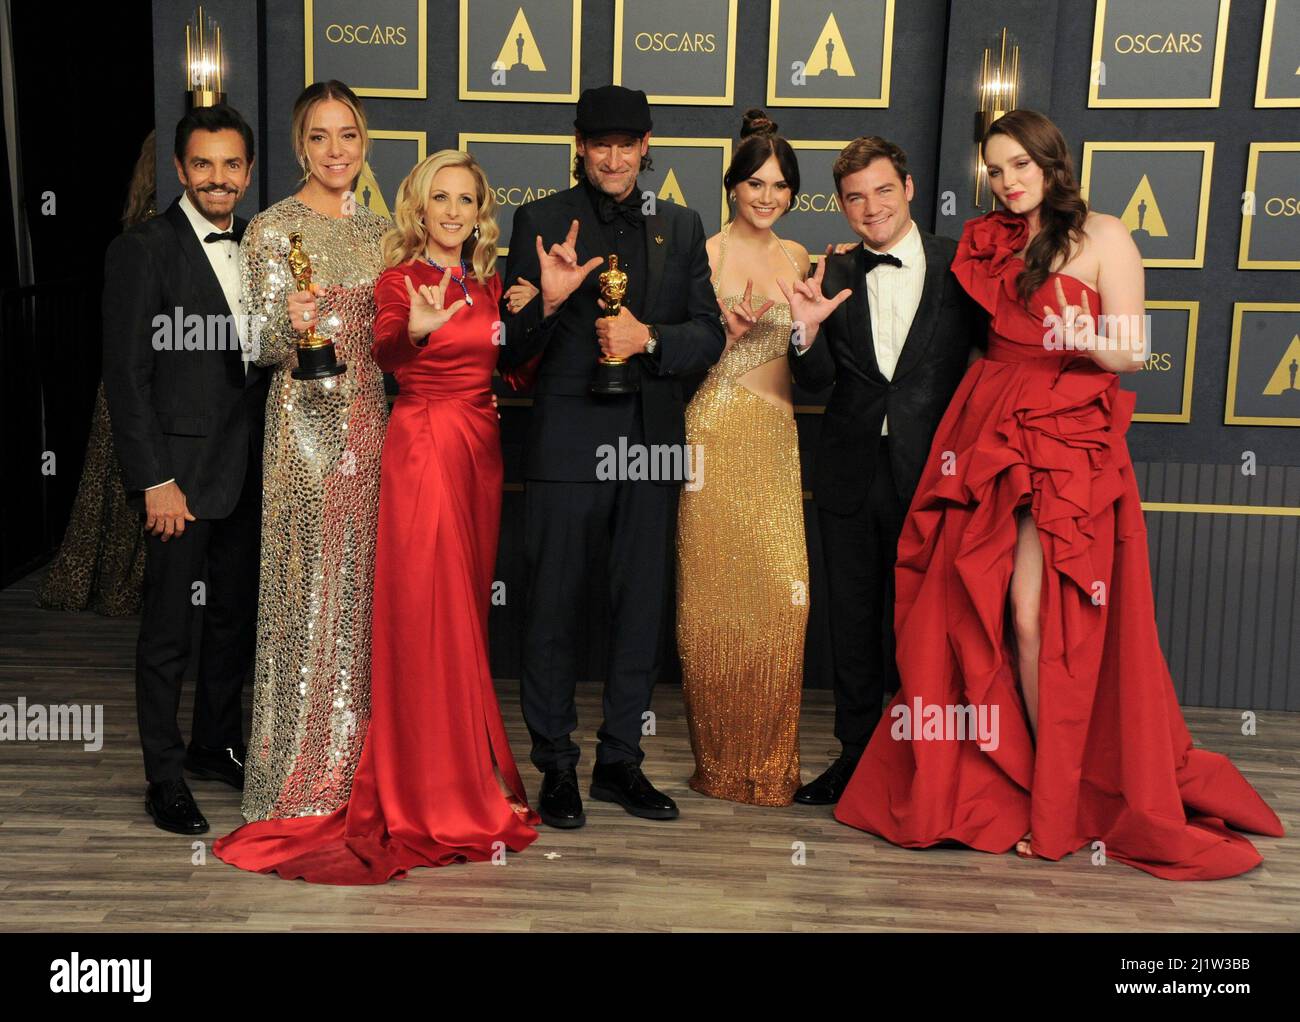 Los Angeles, CA. 27th Mar, 2022. Emilia Jones, Daniel Durant, Sian Heder, Marlee Matlin, Eugenio Derbez, Fabrice Gianfermi, Patrick Wachsberger, Troy Kotsur, Amy Forsyth, Philippe Rousselet in the press room for 94th Academy Awards - Press Room, Dolby Theatre, Los Angeles, CA March 27, 2022. Credit: Elizabeth Goodenough/Everett Collection/Alamy Live News Stock Photo